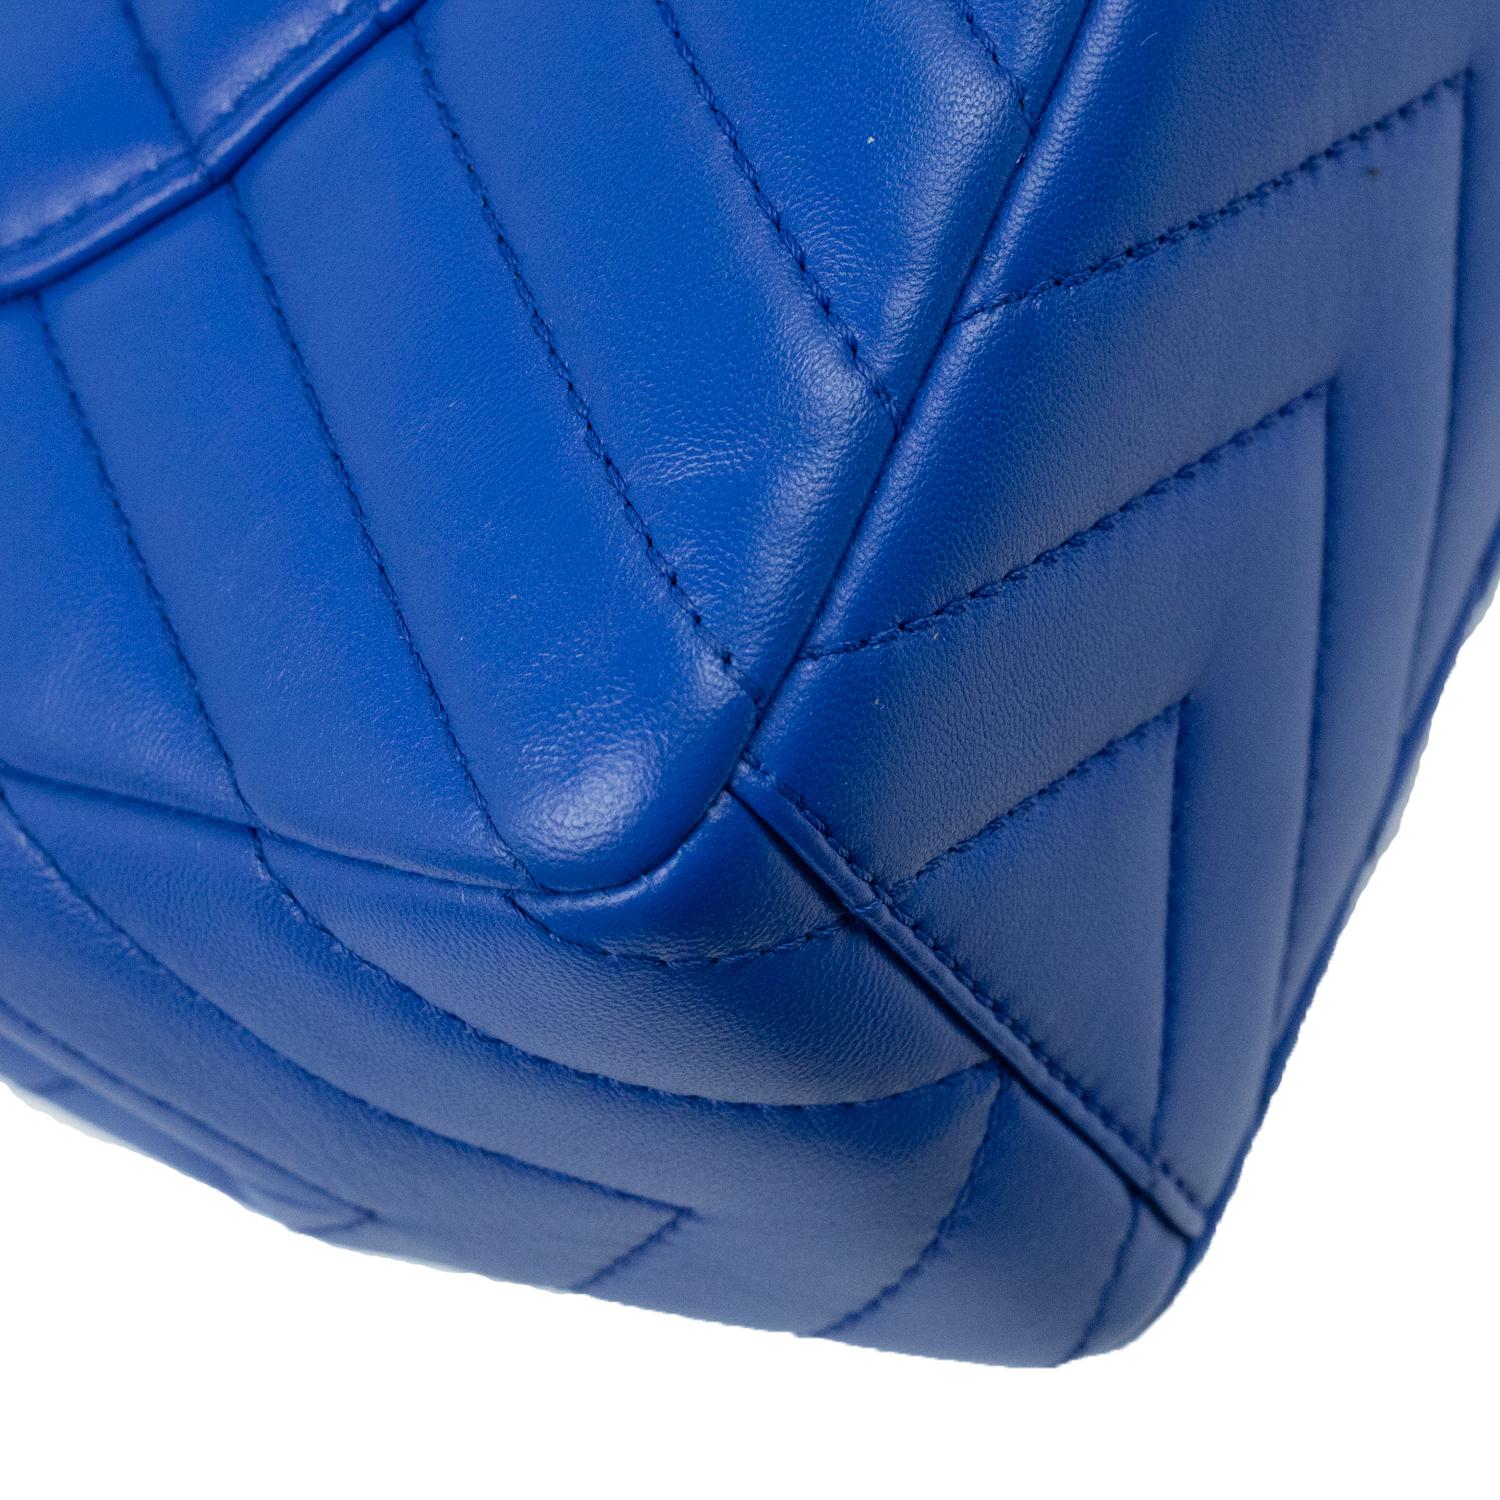 CHANEL, Jumbo in blue leather 8